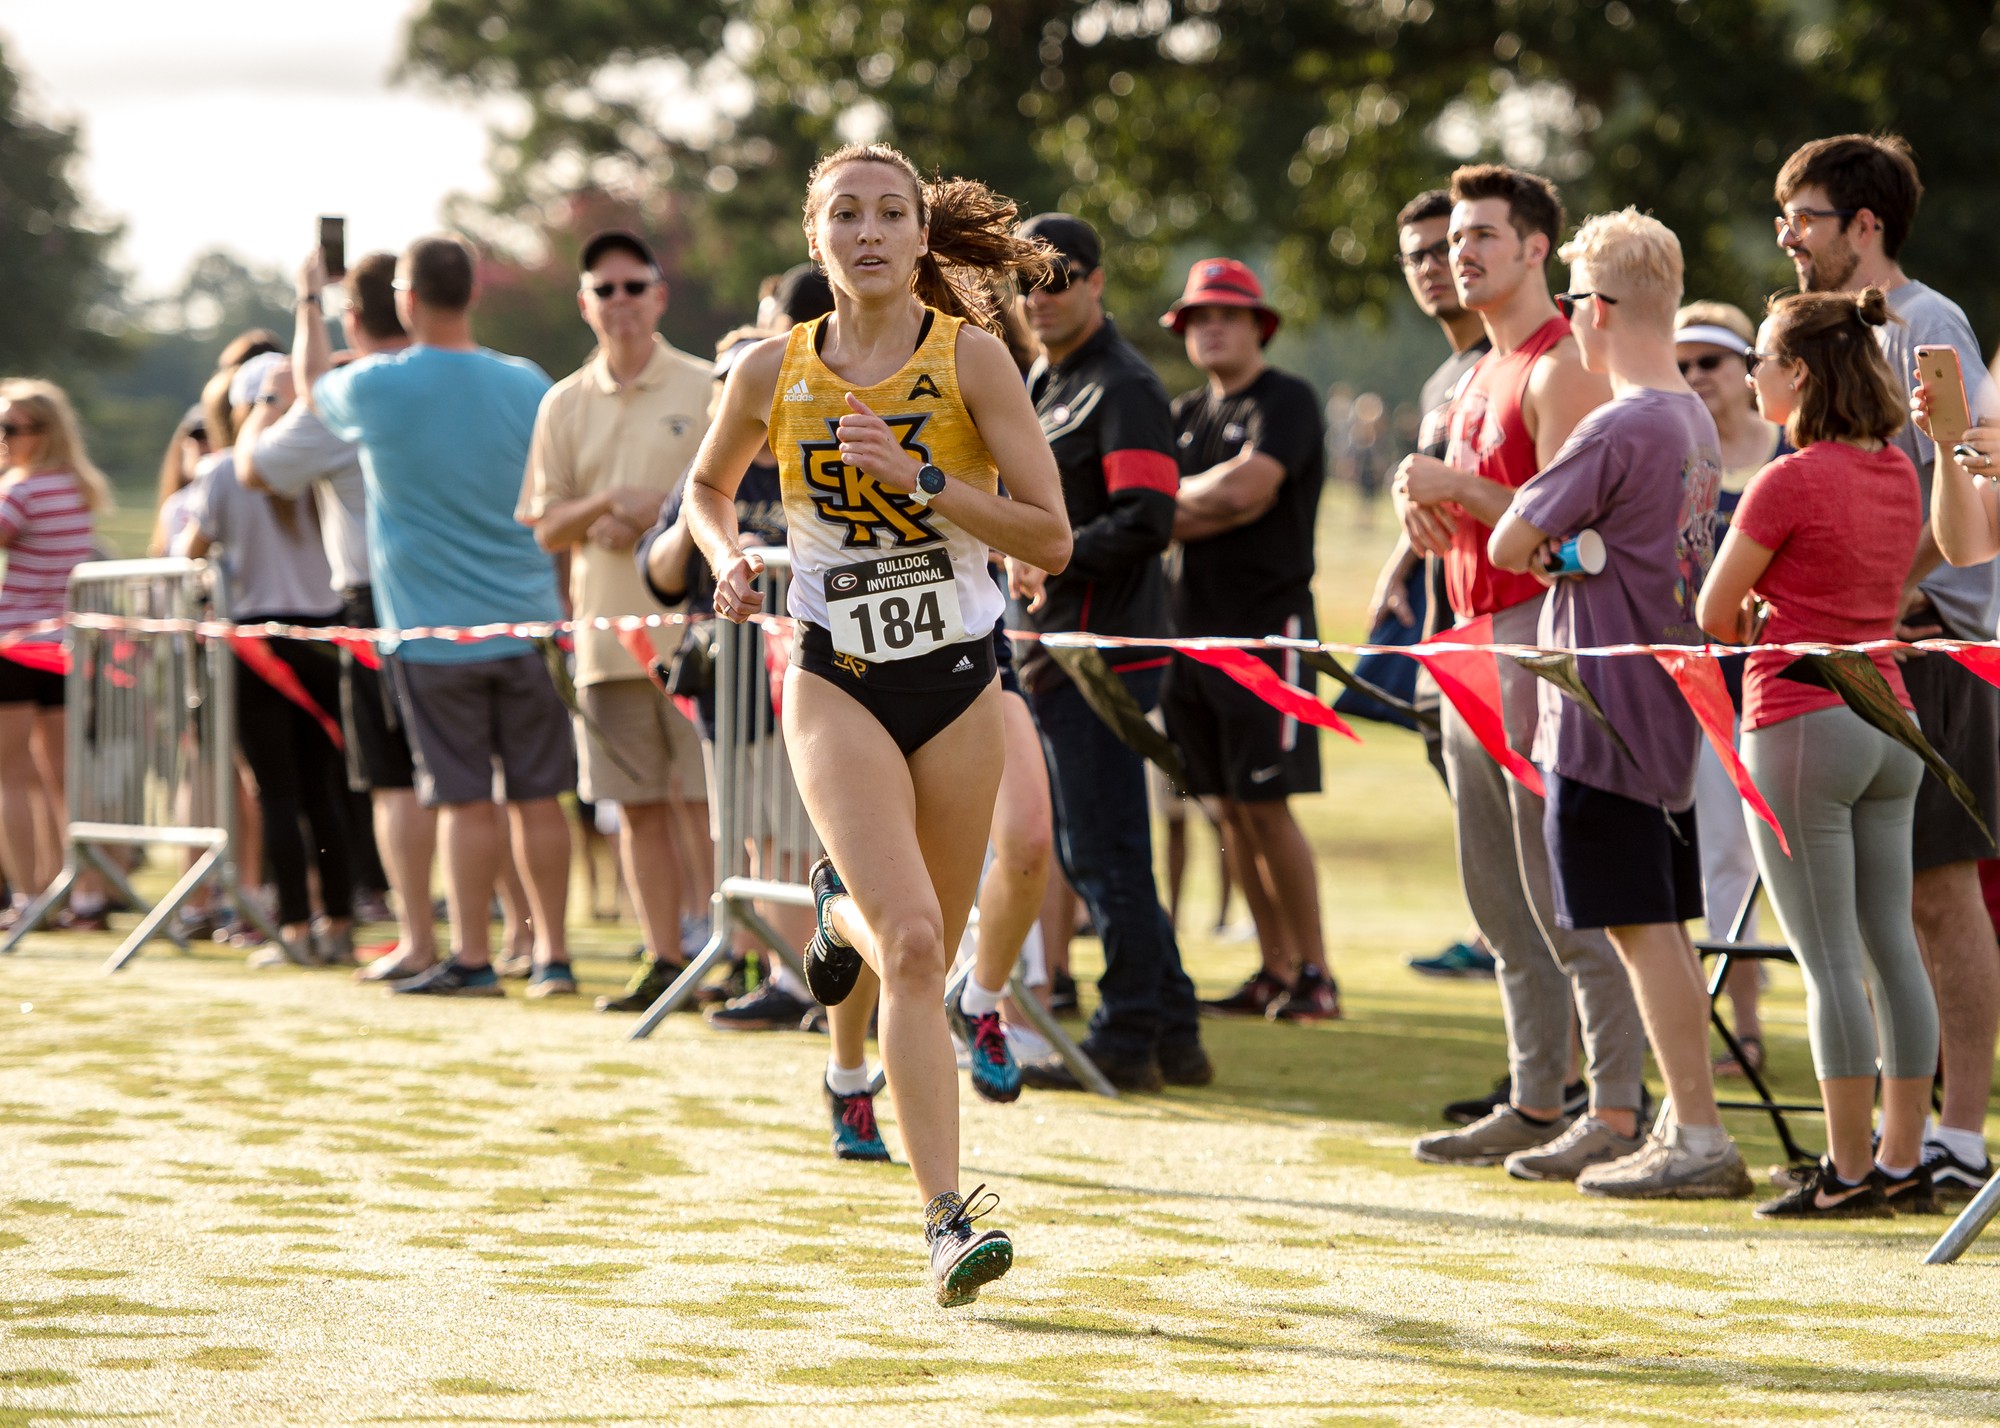 Cross-country season starts off on the right foot